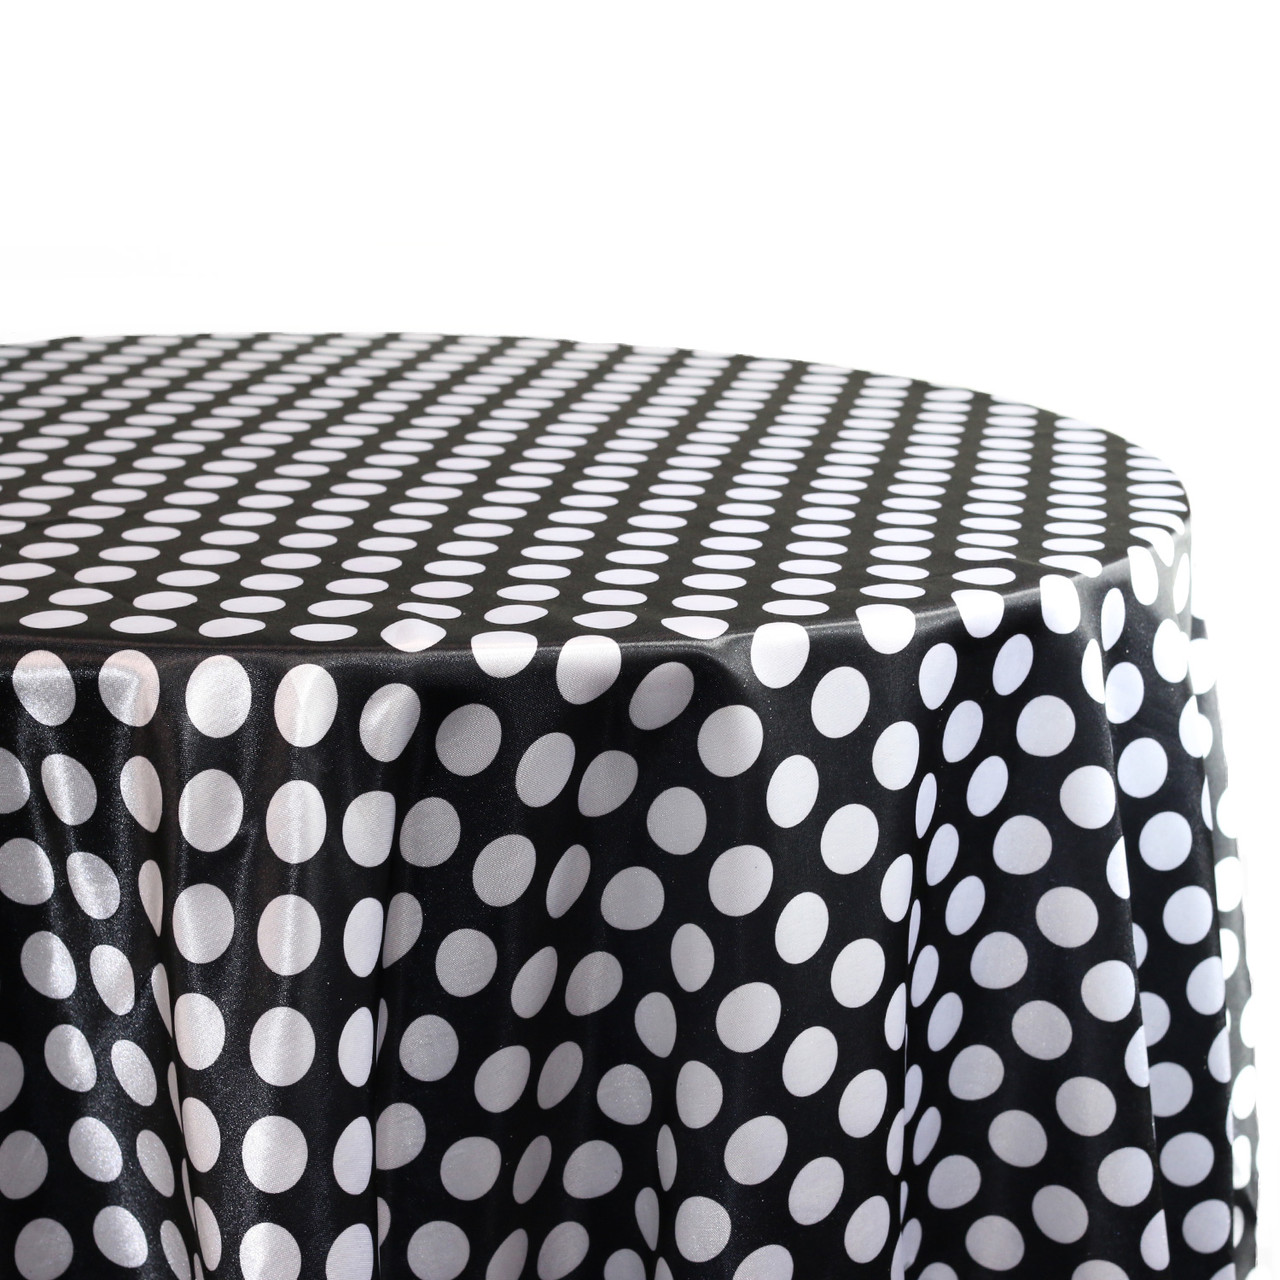 10 Polka Dots 60"x126" Satin Tablecloths Table Overlays Wholesale Made in USA 